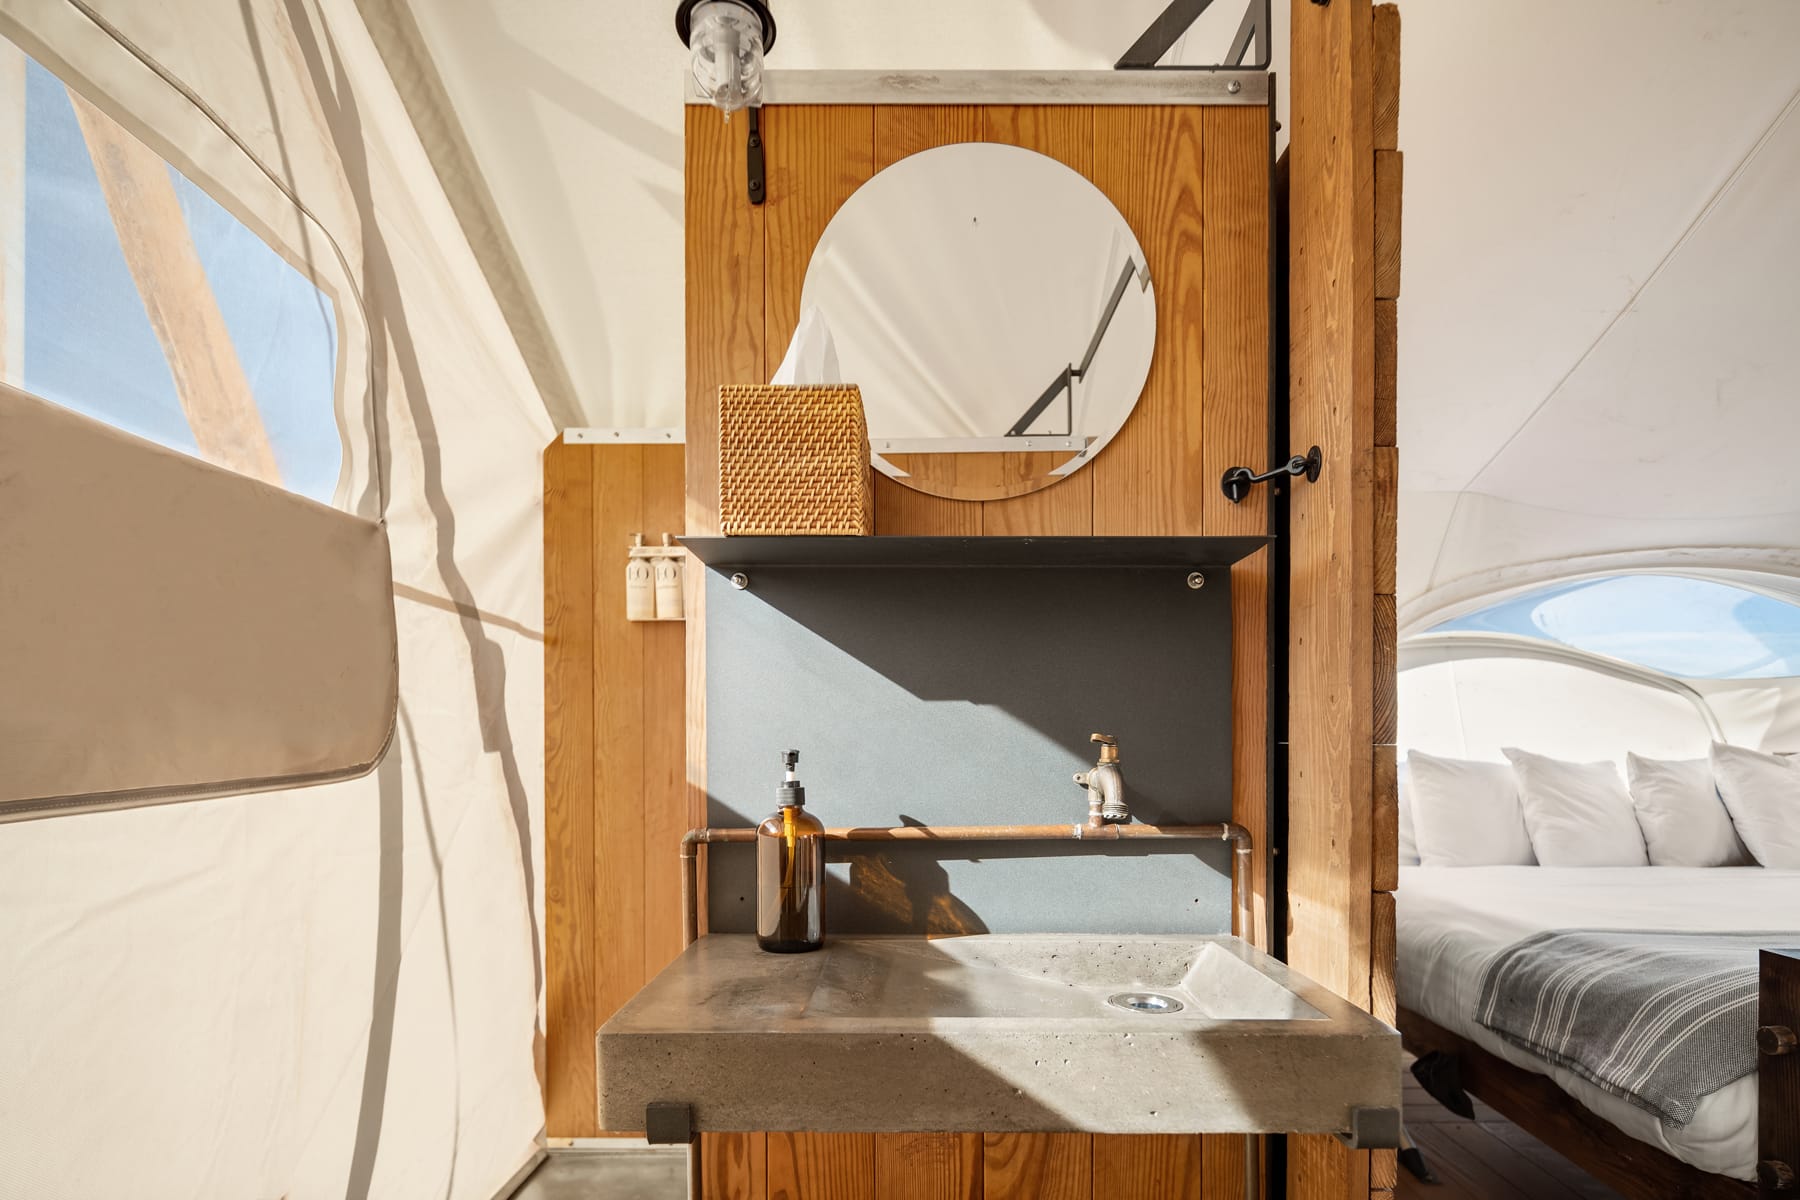 View of Bathroom Sink in Stargazer Tent at Under Canvas Grand Canyon